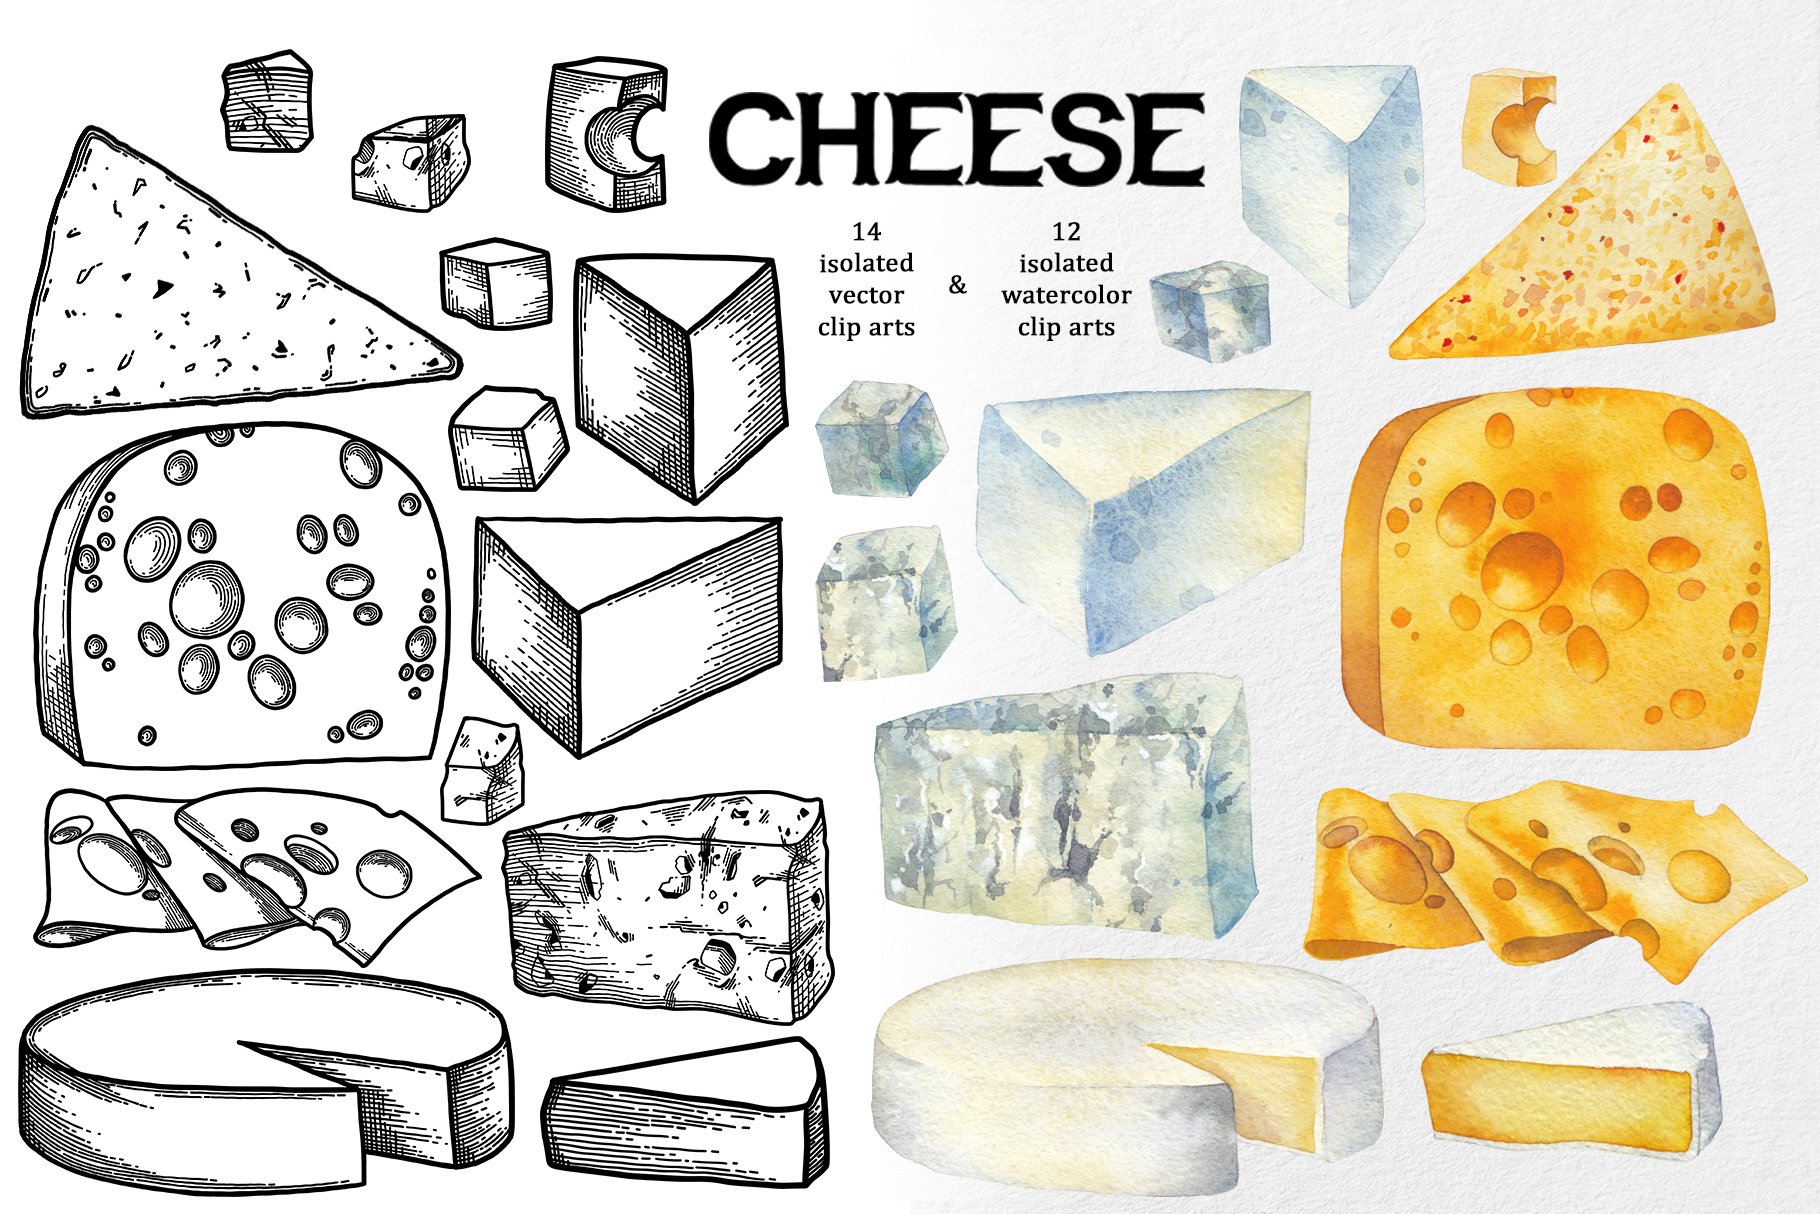 Set of vector and watercolor images of various types of cheese.